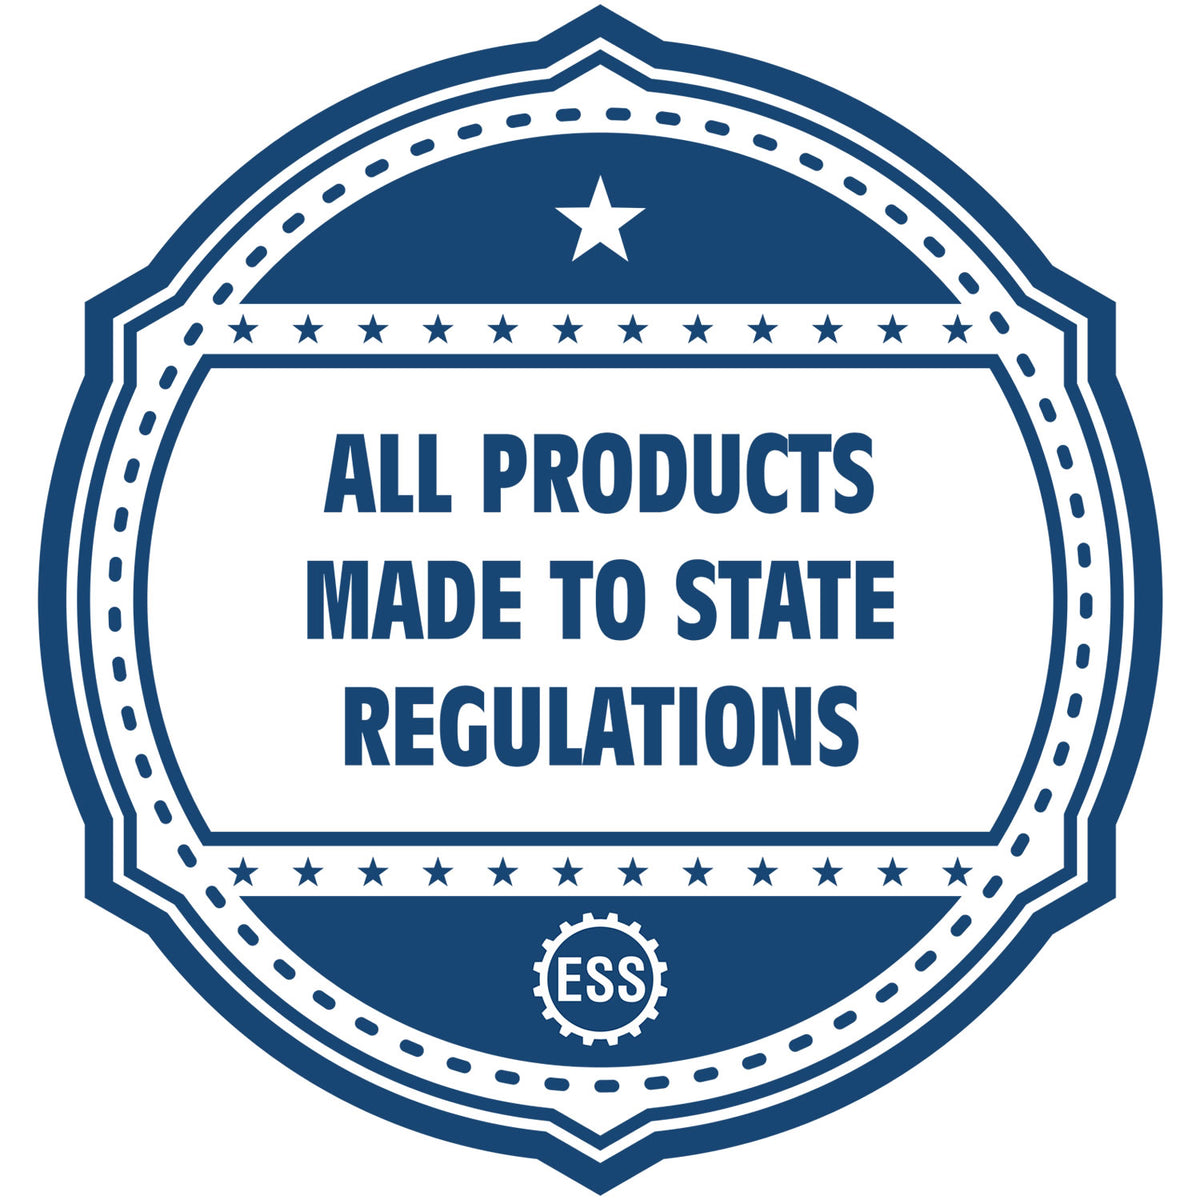 A blue icon or badge for the Ohio Professional Geologist Seal Stamp showing that this product is made in compliance with state regulations.